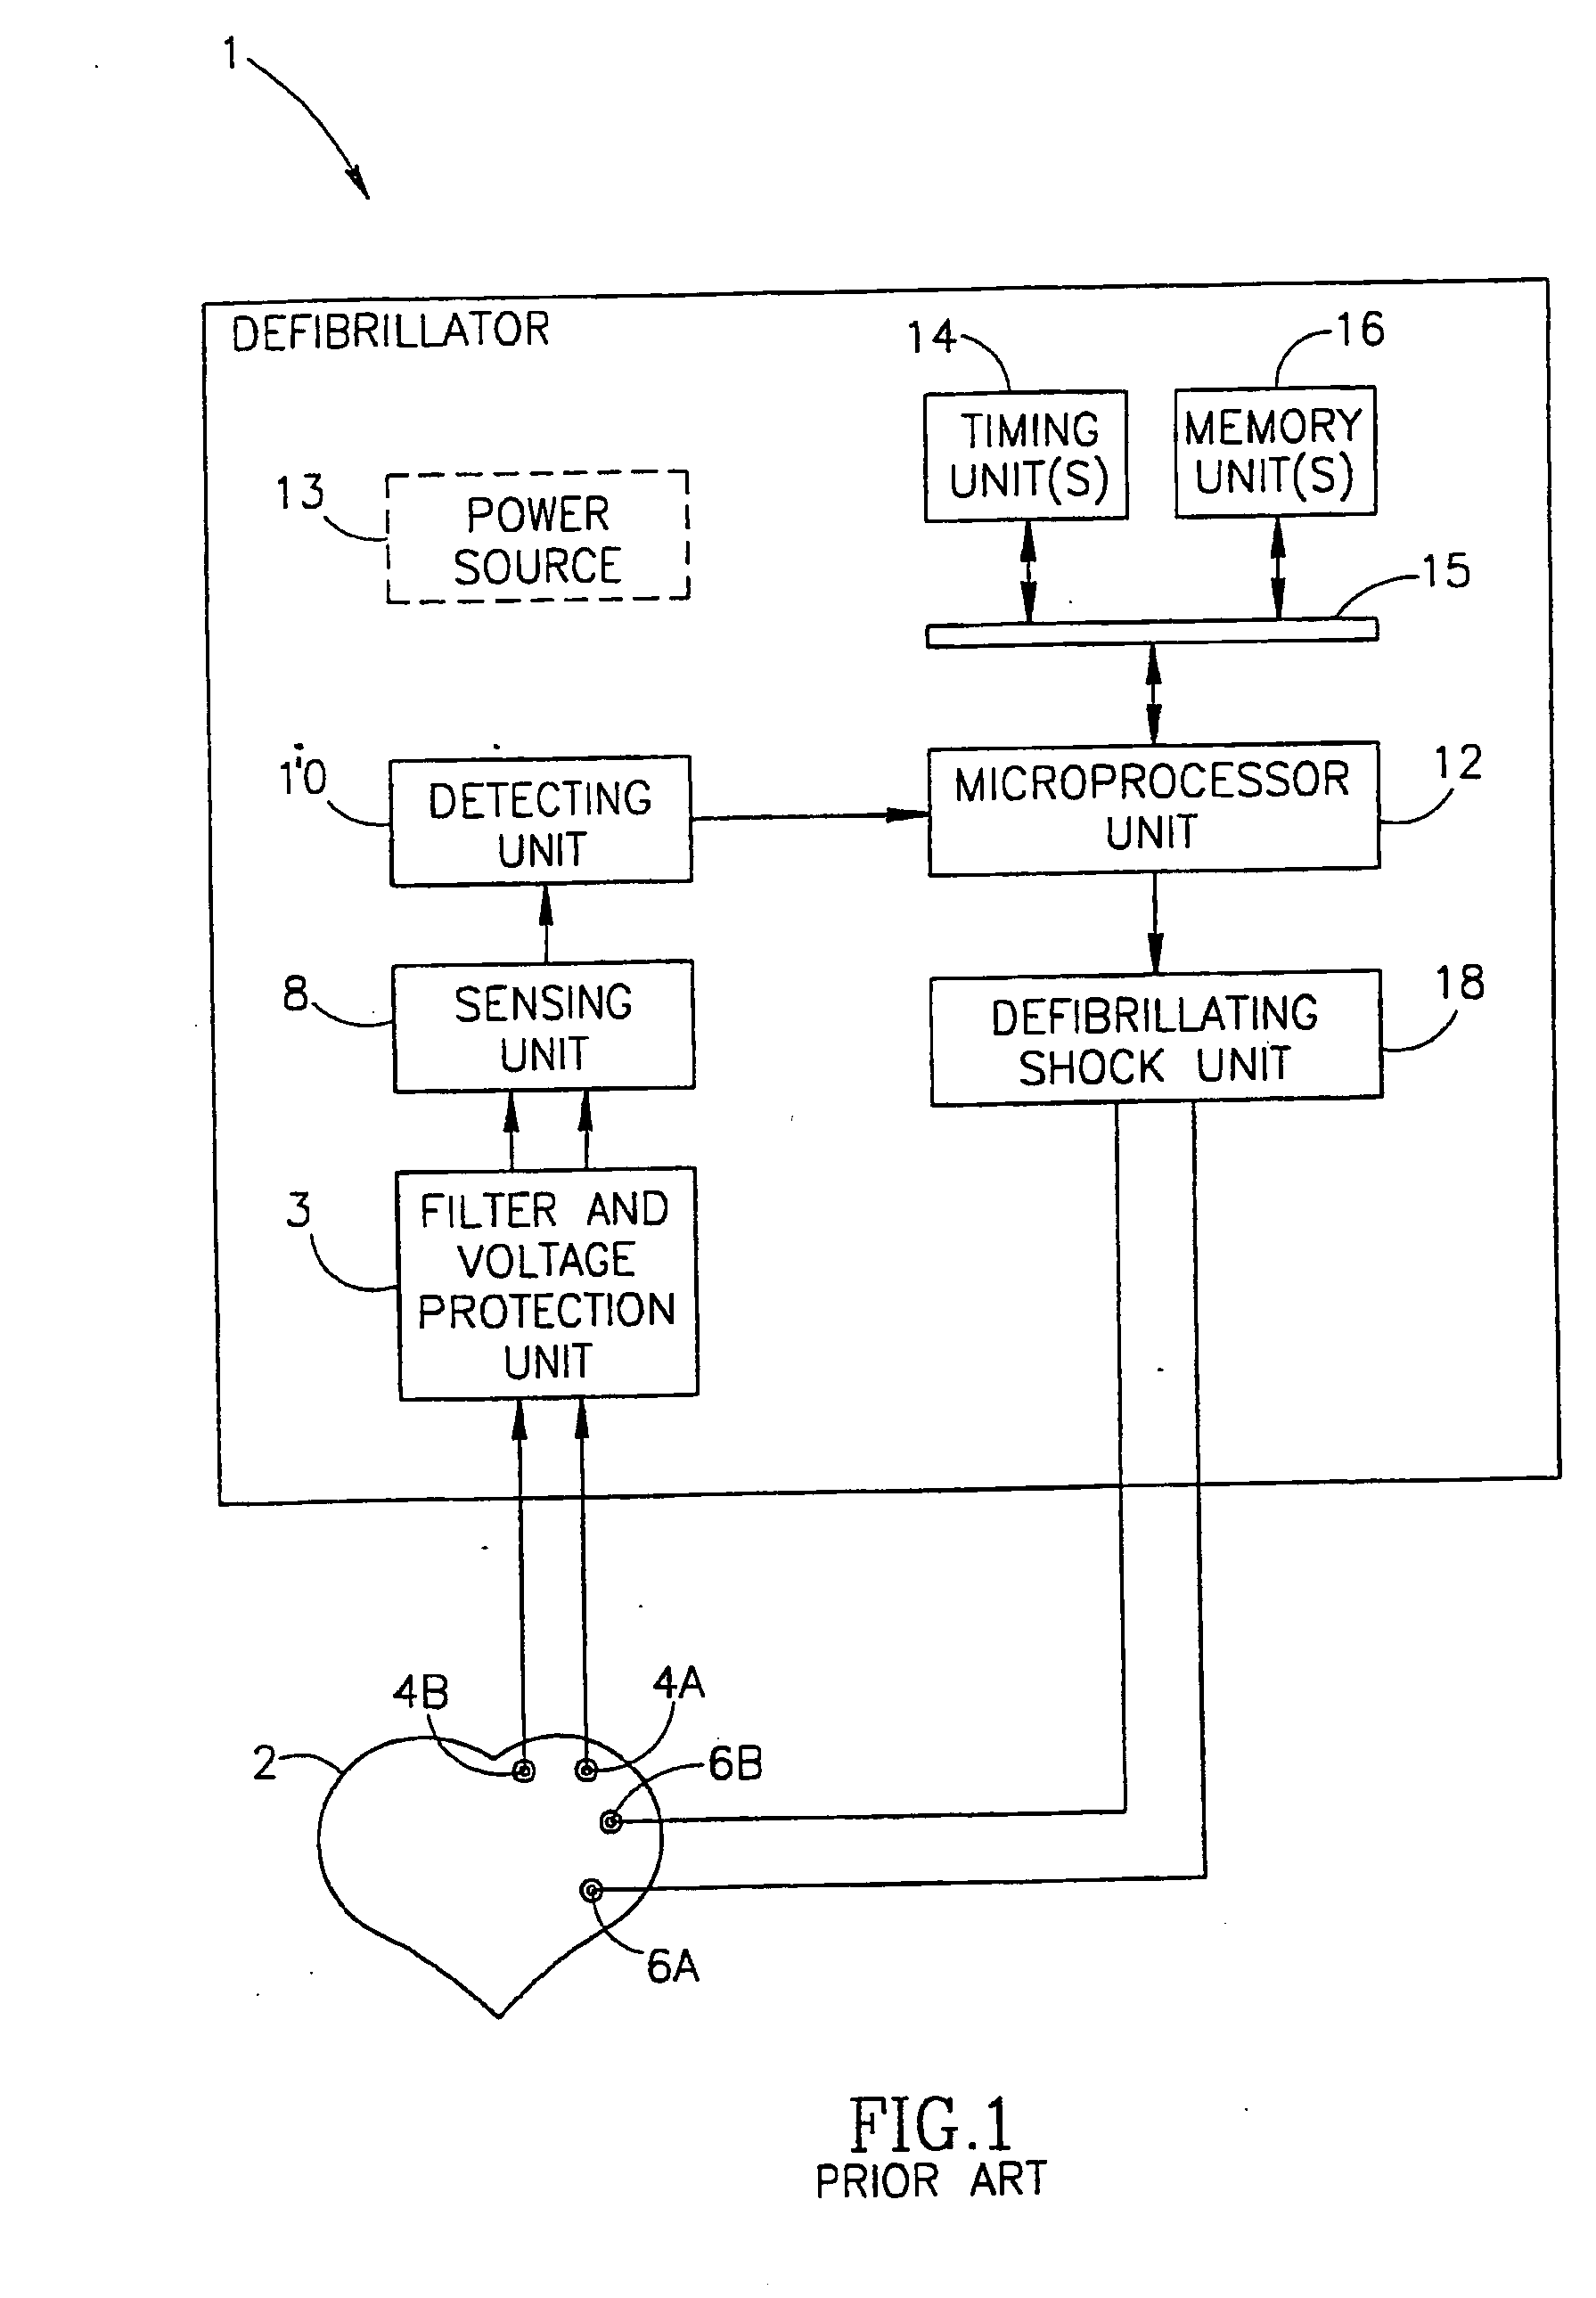 Cardiac contractility modulation device having anti-arrhythmic capabilities and method of operating thereof